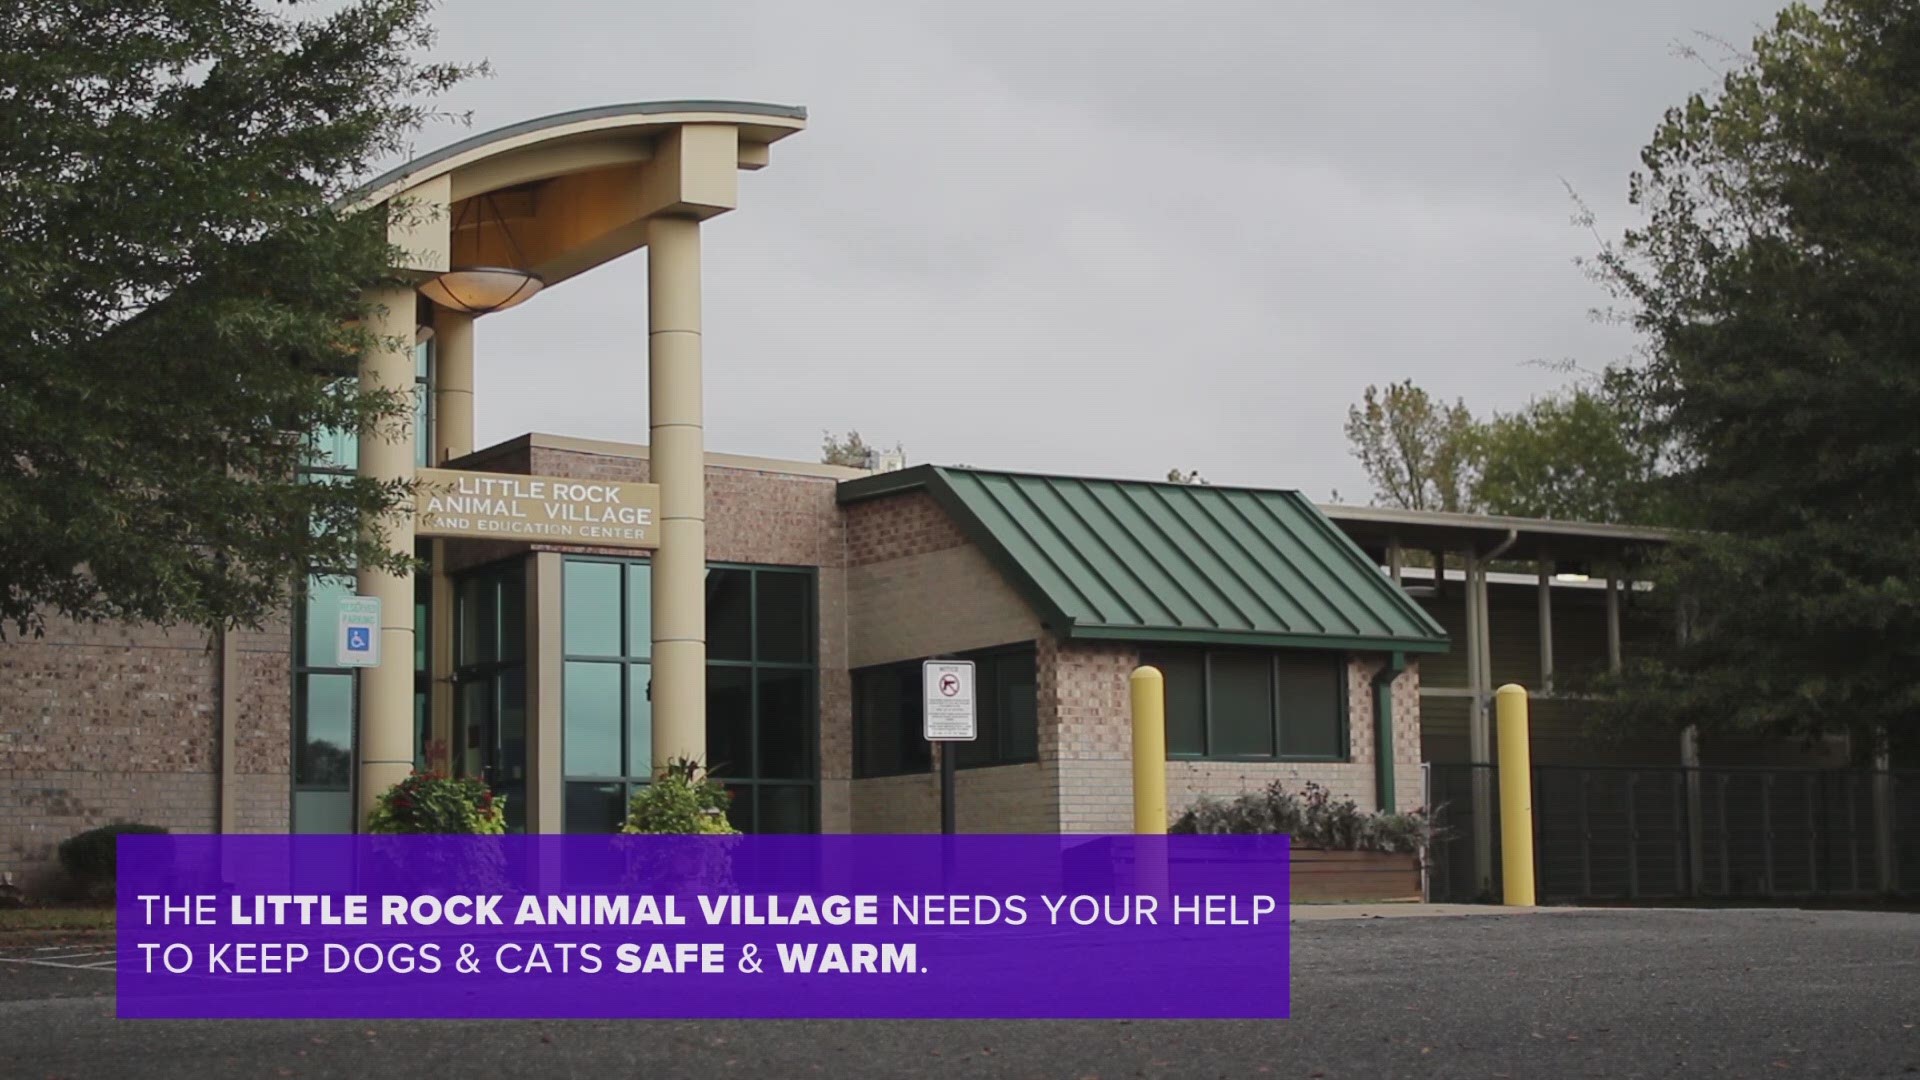 Do you have extra bath towels laying around? The Little Rock Animal Village is in desperate need of towel donations!